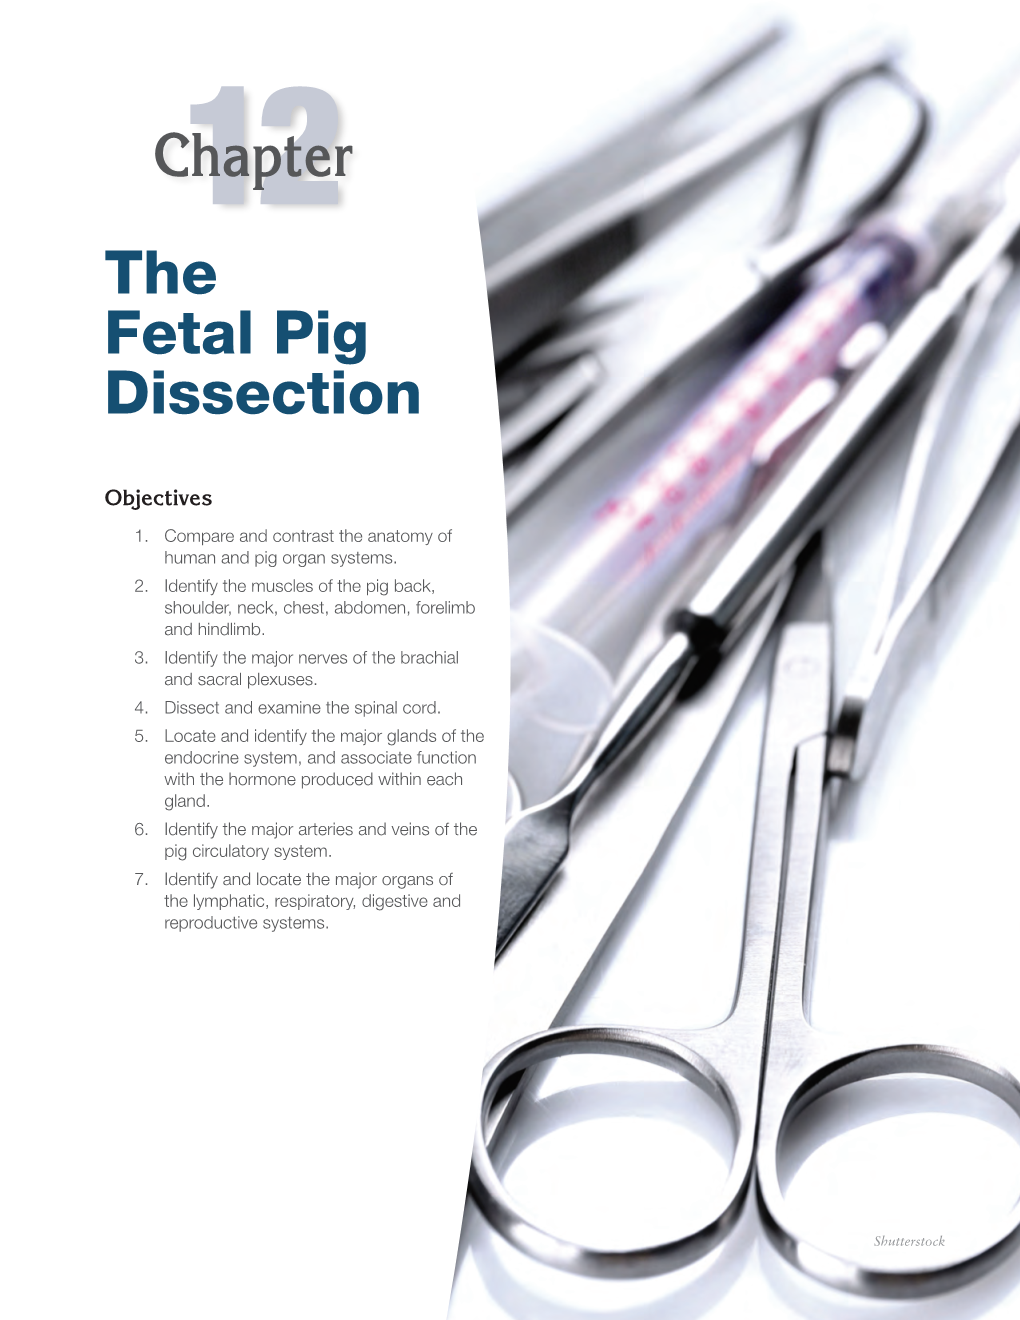 12Chapter the Fetal Pig Dissection